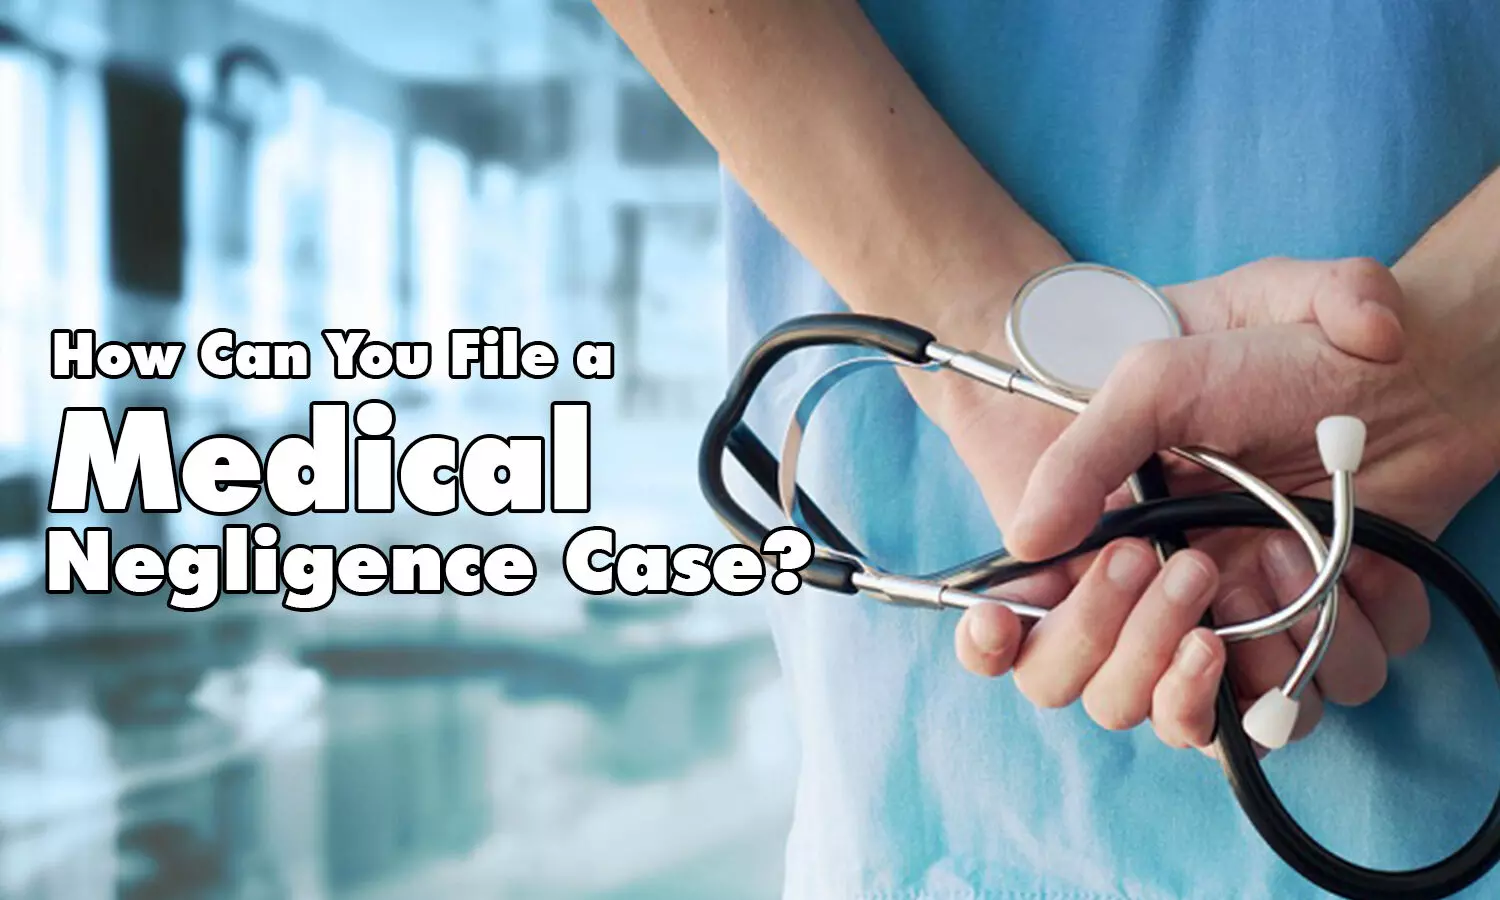 How Can You File a Medical Negligence Case?